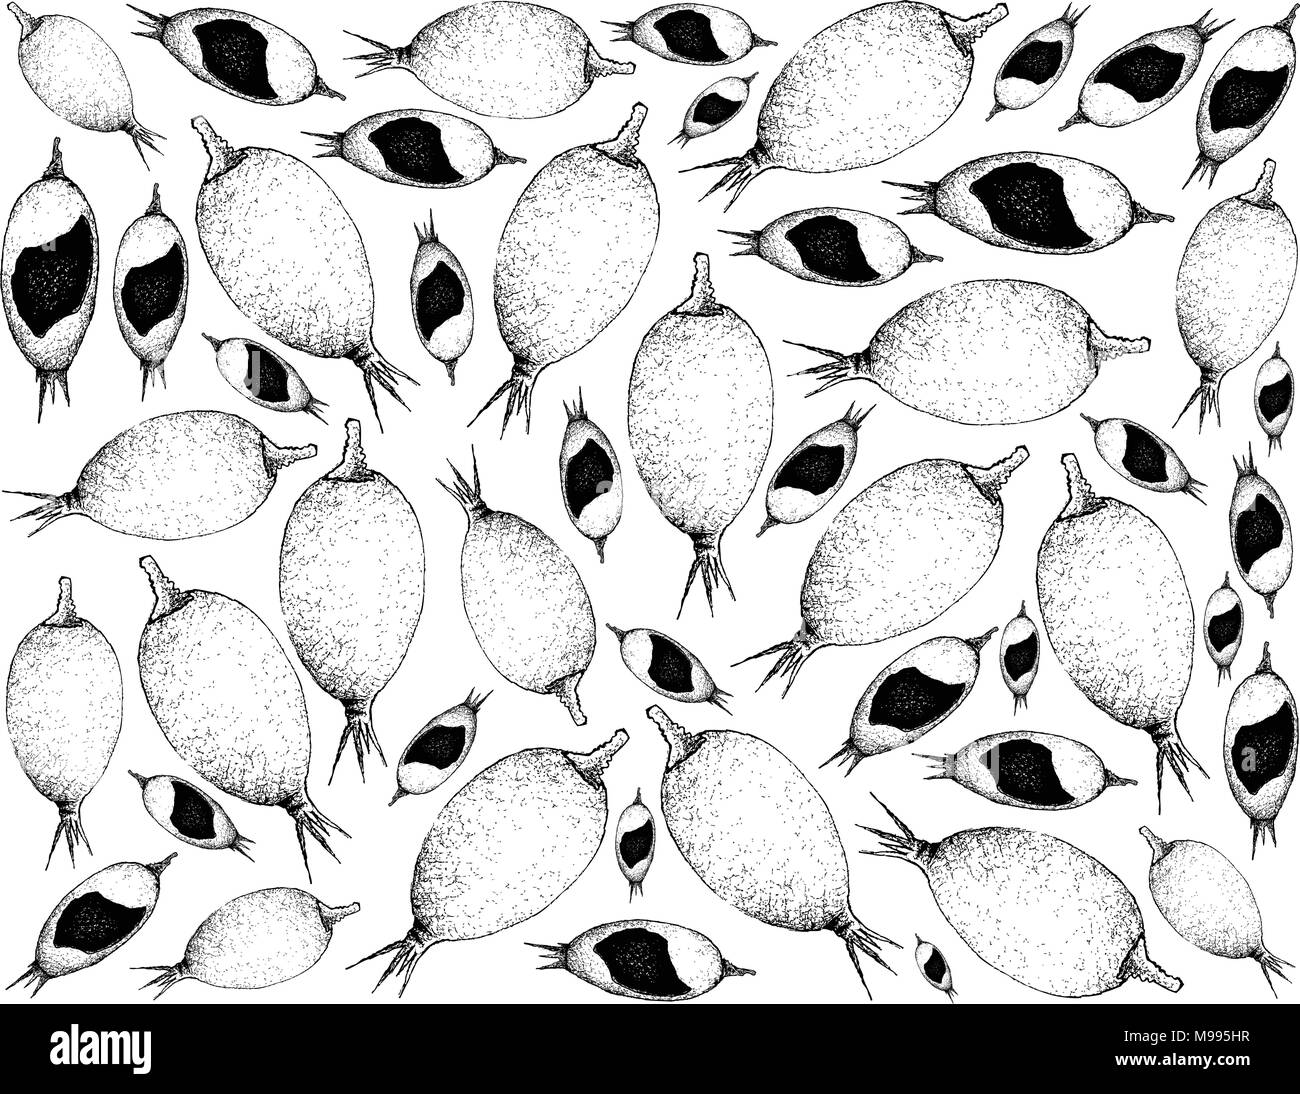 Berry Fruits, Illustration Wallpaper Background of Hand Drawn Sketch Delicious Fresh Blackberry Jam Fruit or Rosenbergiodendron Formosum. Stock Vector